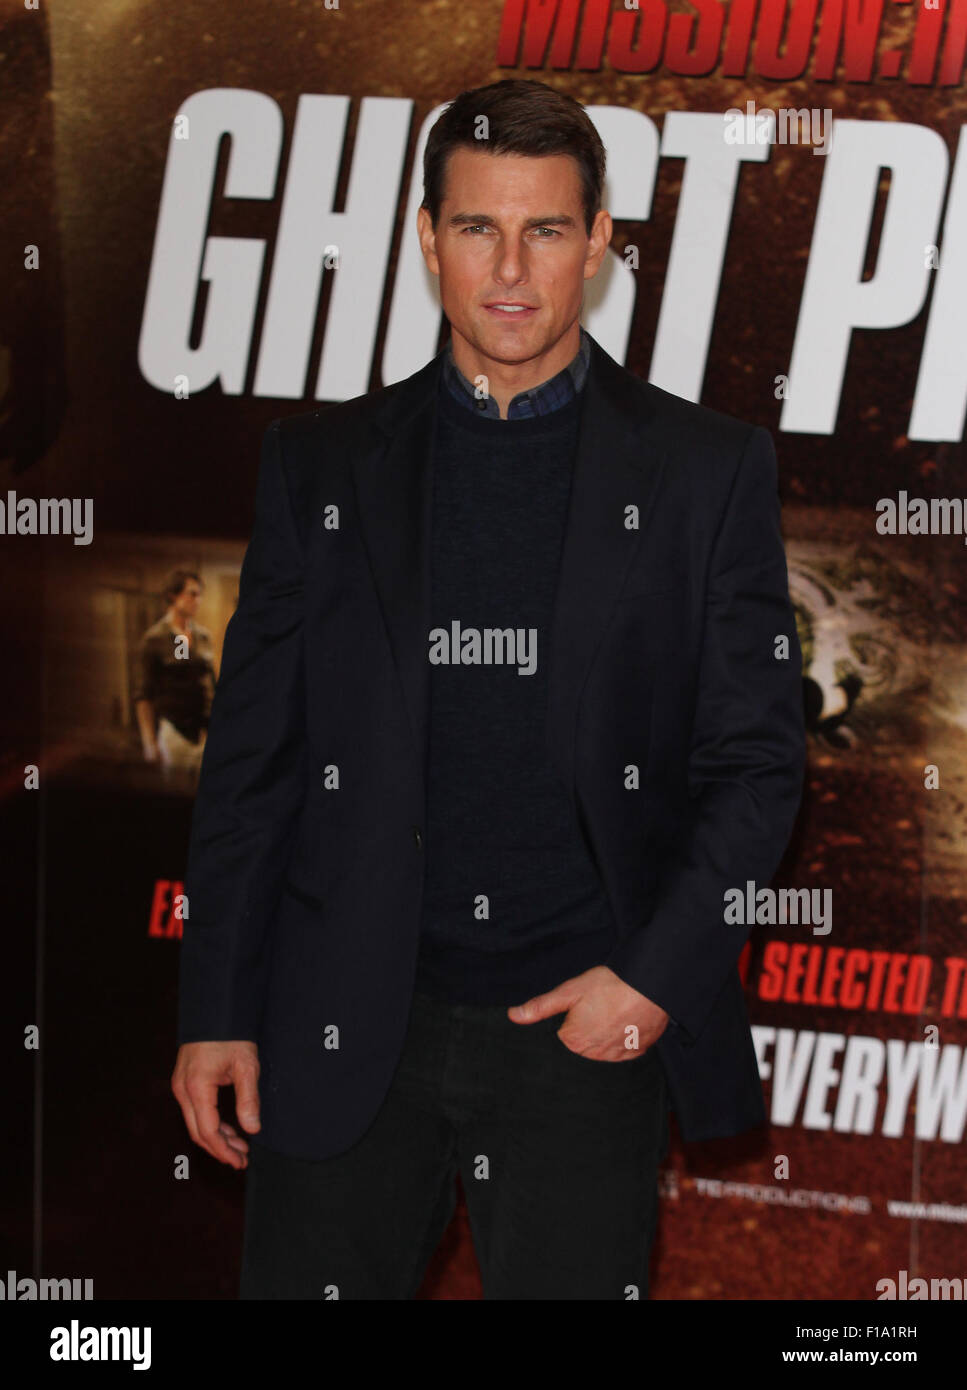 Tom Cruise attends a film premiere in London 2011 Stock Photo